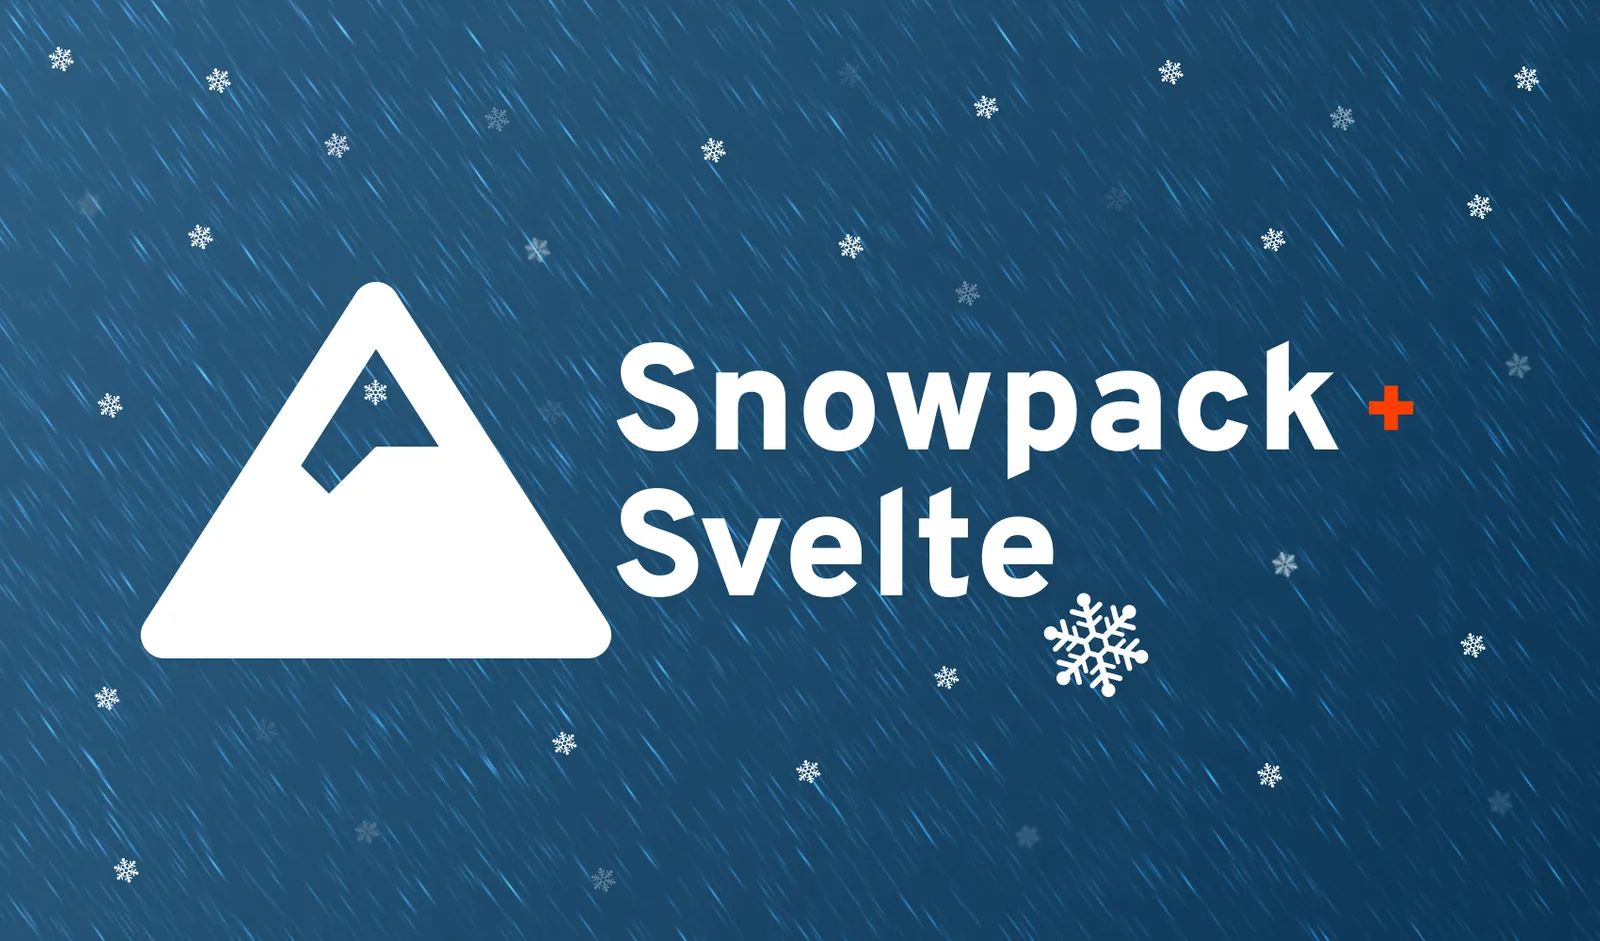 How to Use Snowpack with Svelte?